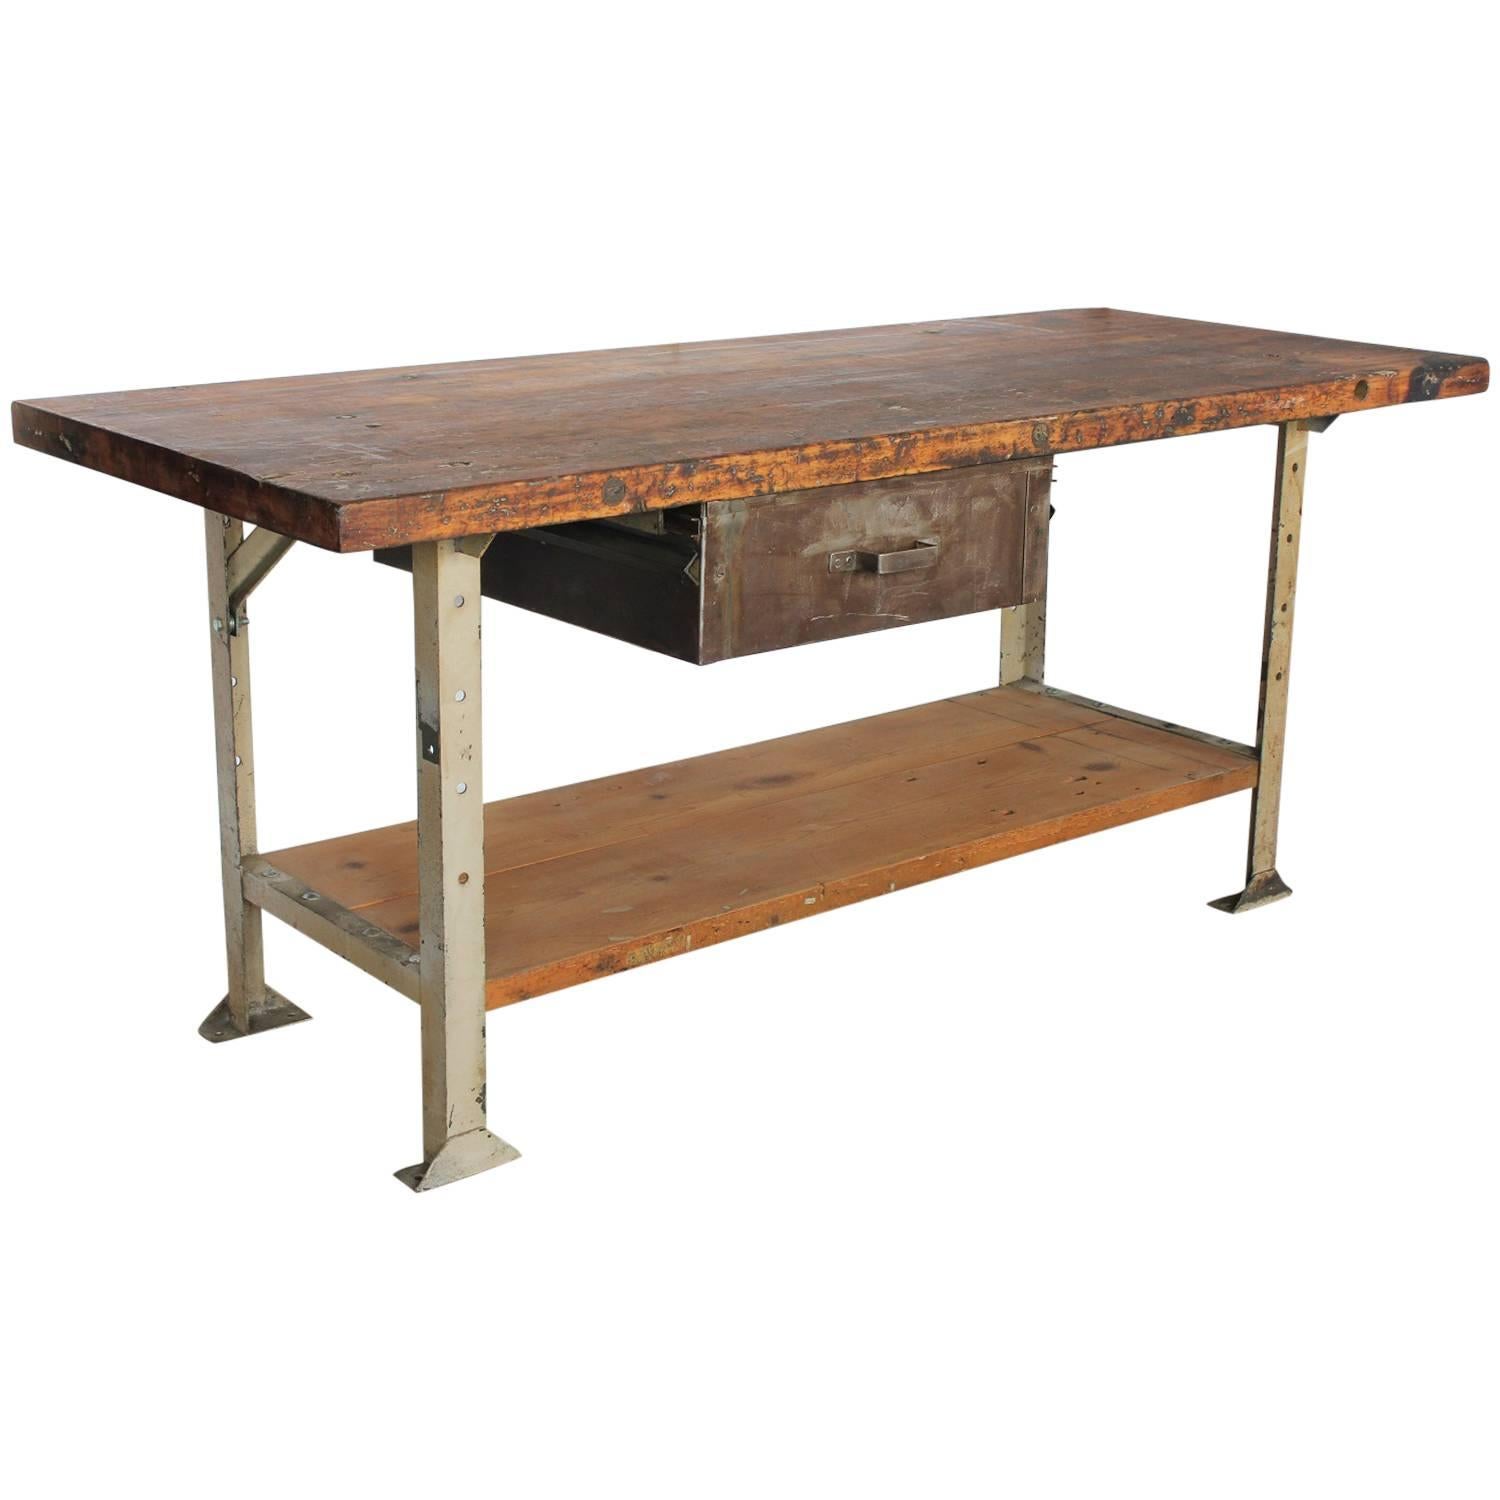 1930s American Industrial Table For Sale